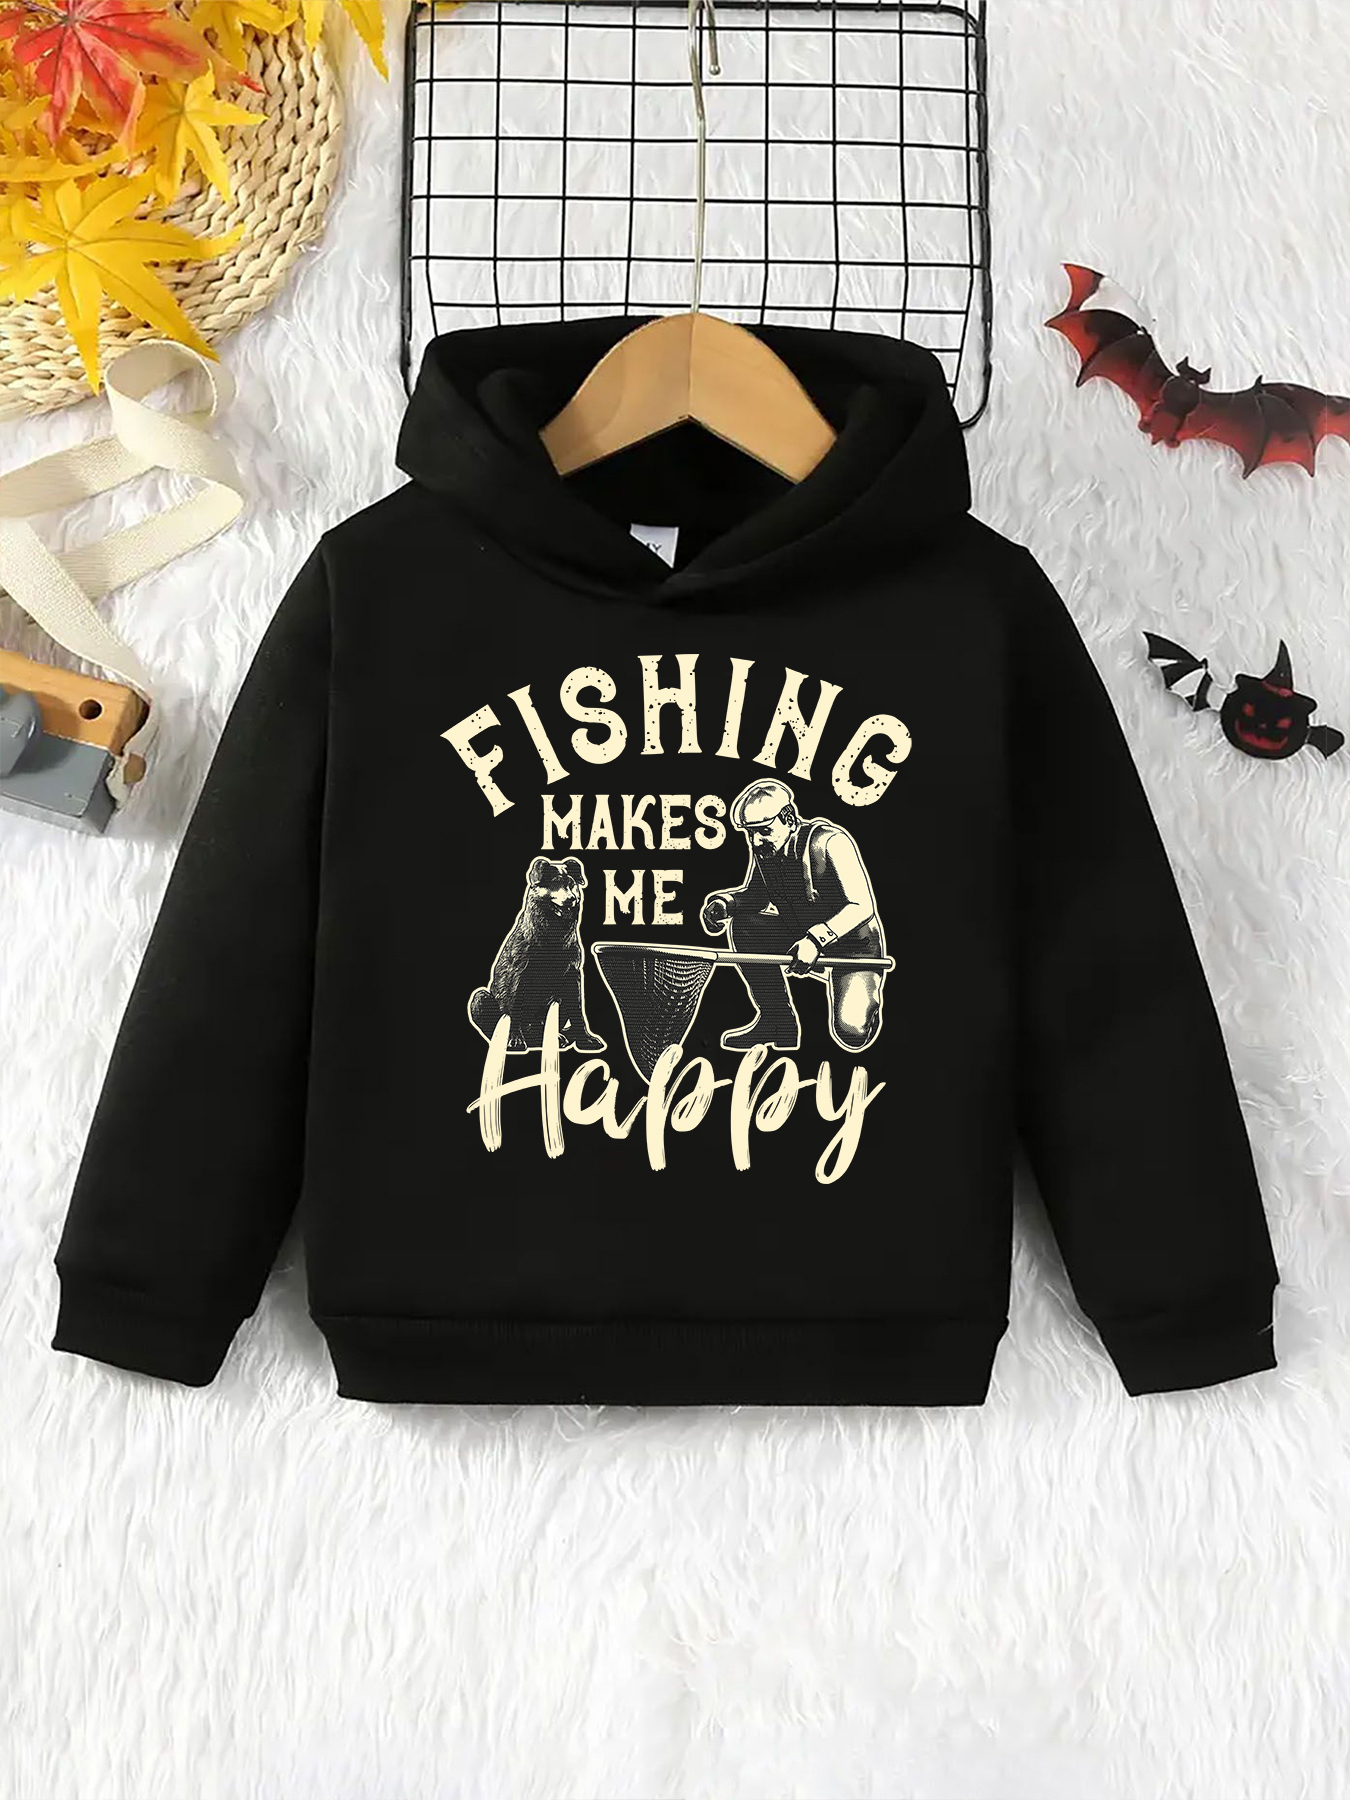 Fishing Maks Me Happy Print Kid's Hoodie, Causal Pullover, Hooded Long Sleeve Top, Boy's Clothes for Spring Fall, As Christmas Gift,Temu